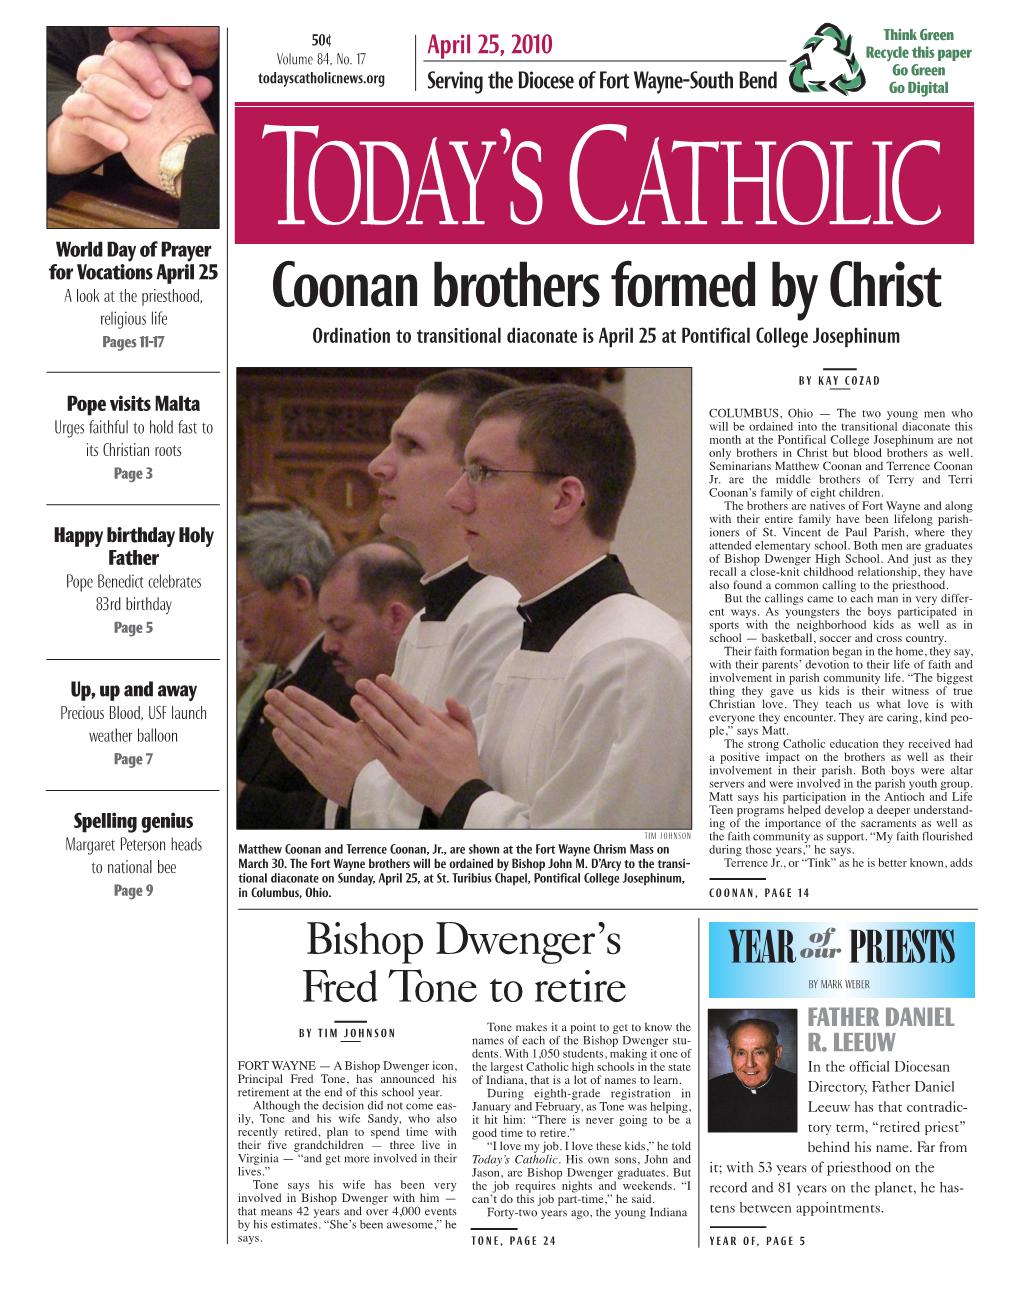 Coonan Brothers Formed by Christ Religious Life Pages 11-17 Ordination to Transitional Diaconate Is April 25 at Pontifical College Josephinum